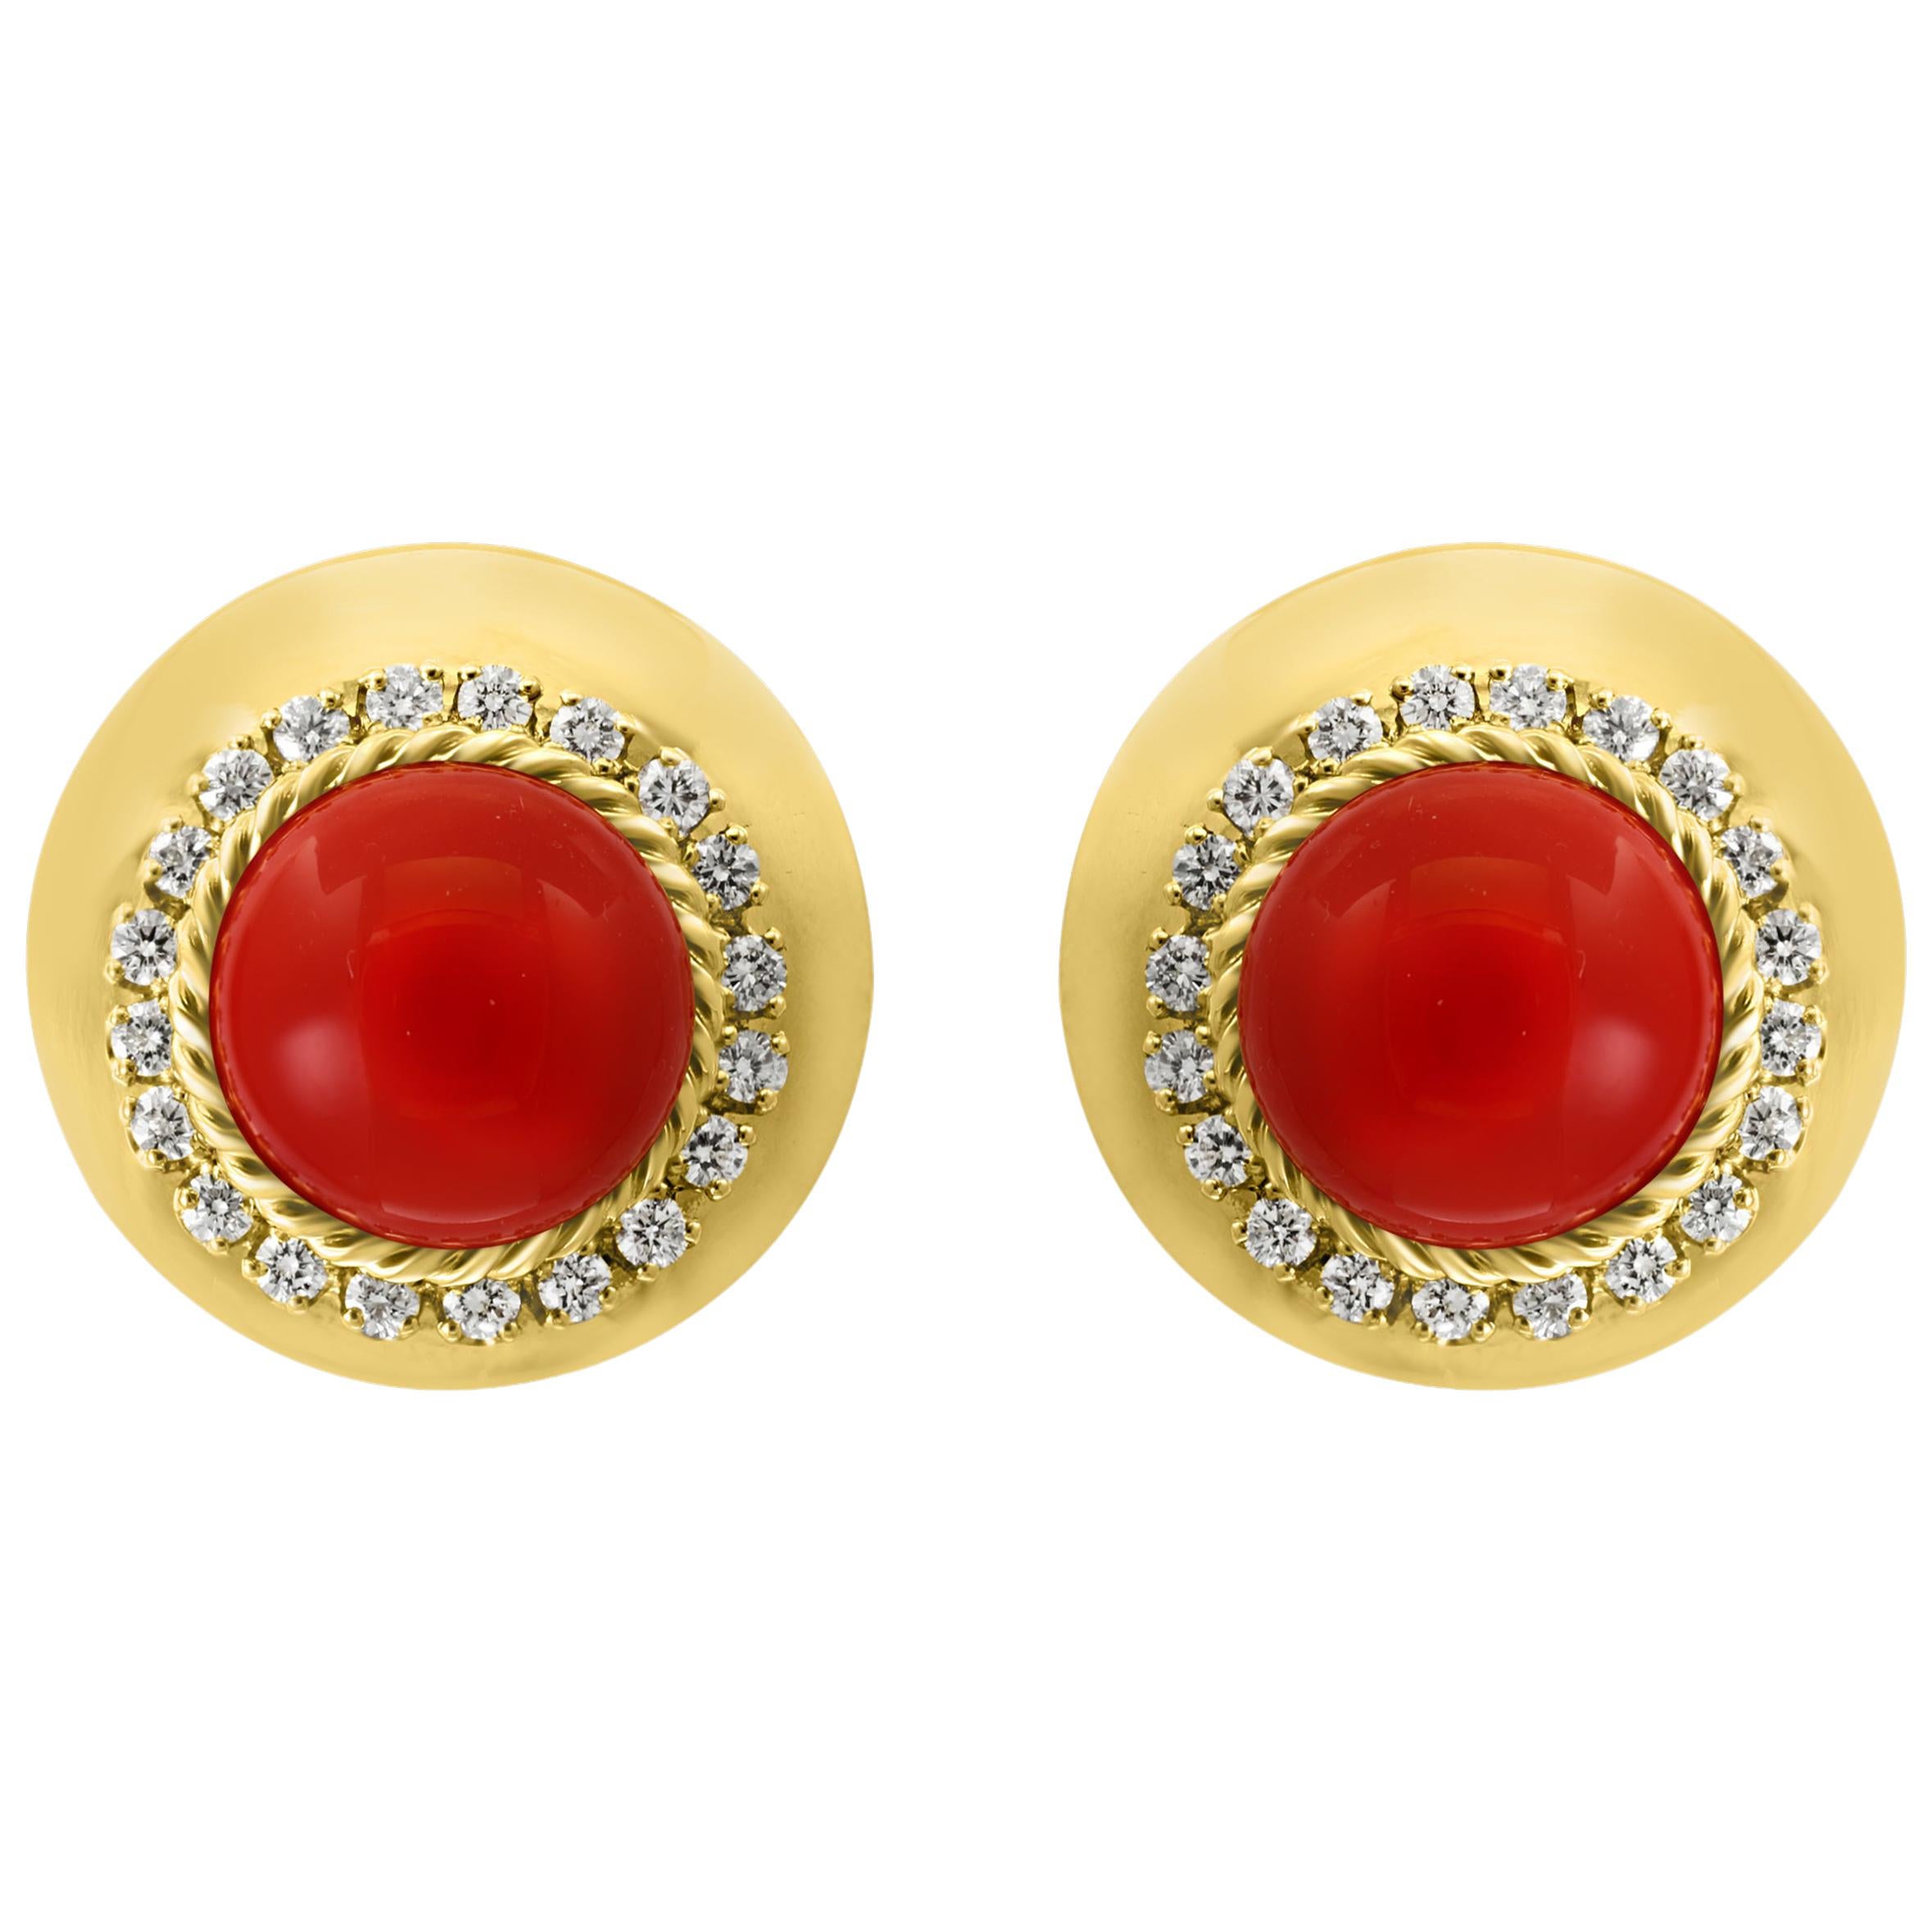 Aletto Black Natural Coral and Diamond Cocktail Earring in 18 Karat Yellow Gold